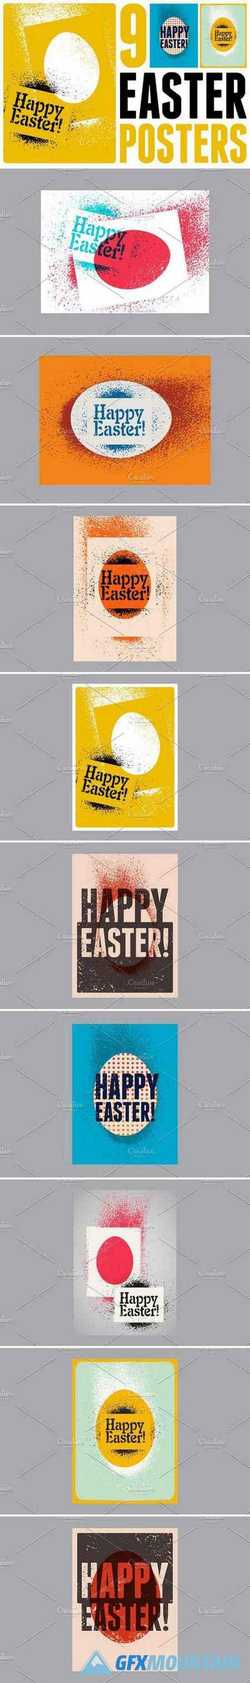 TYPOGRAPHIC EASTER GREETING CARD 2232102